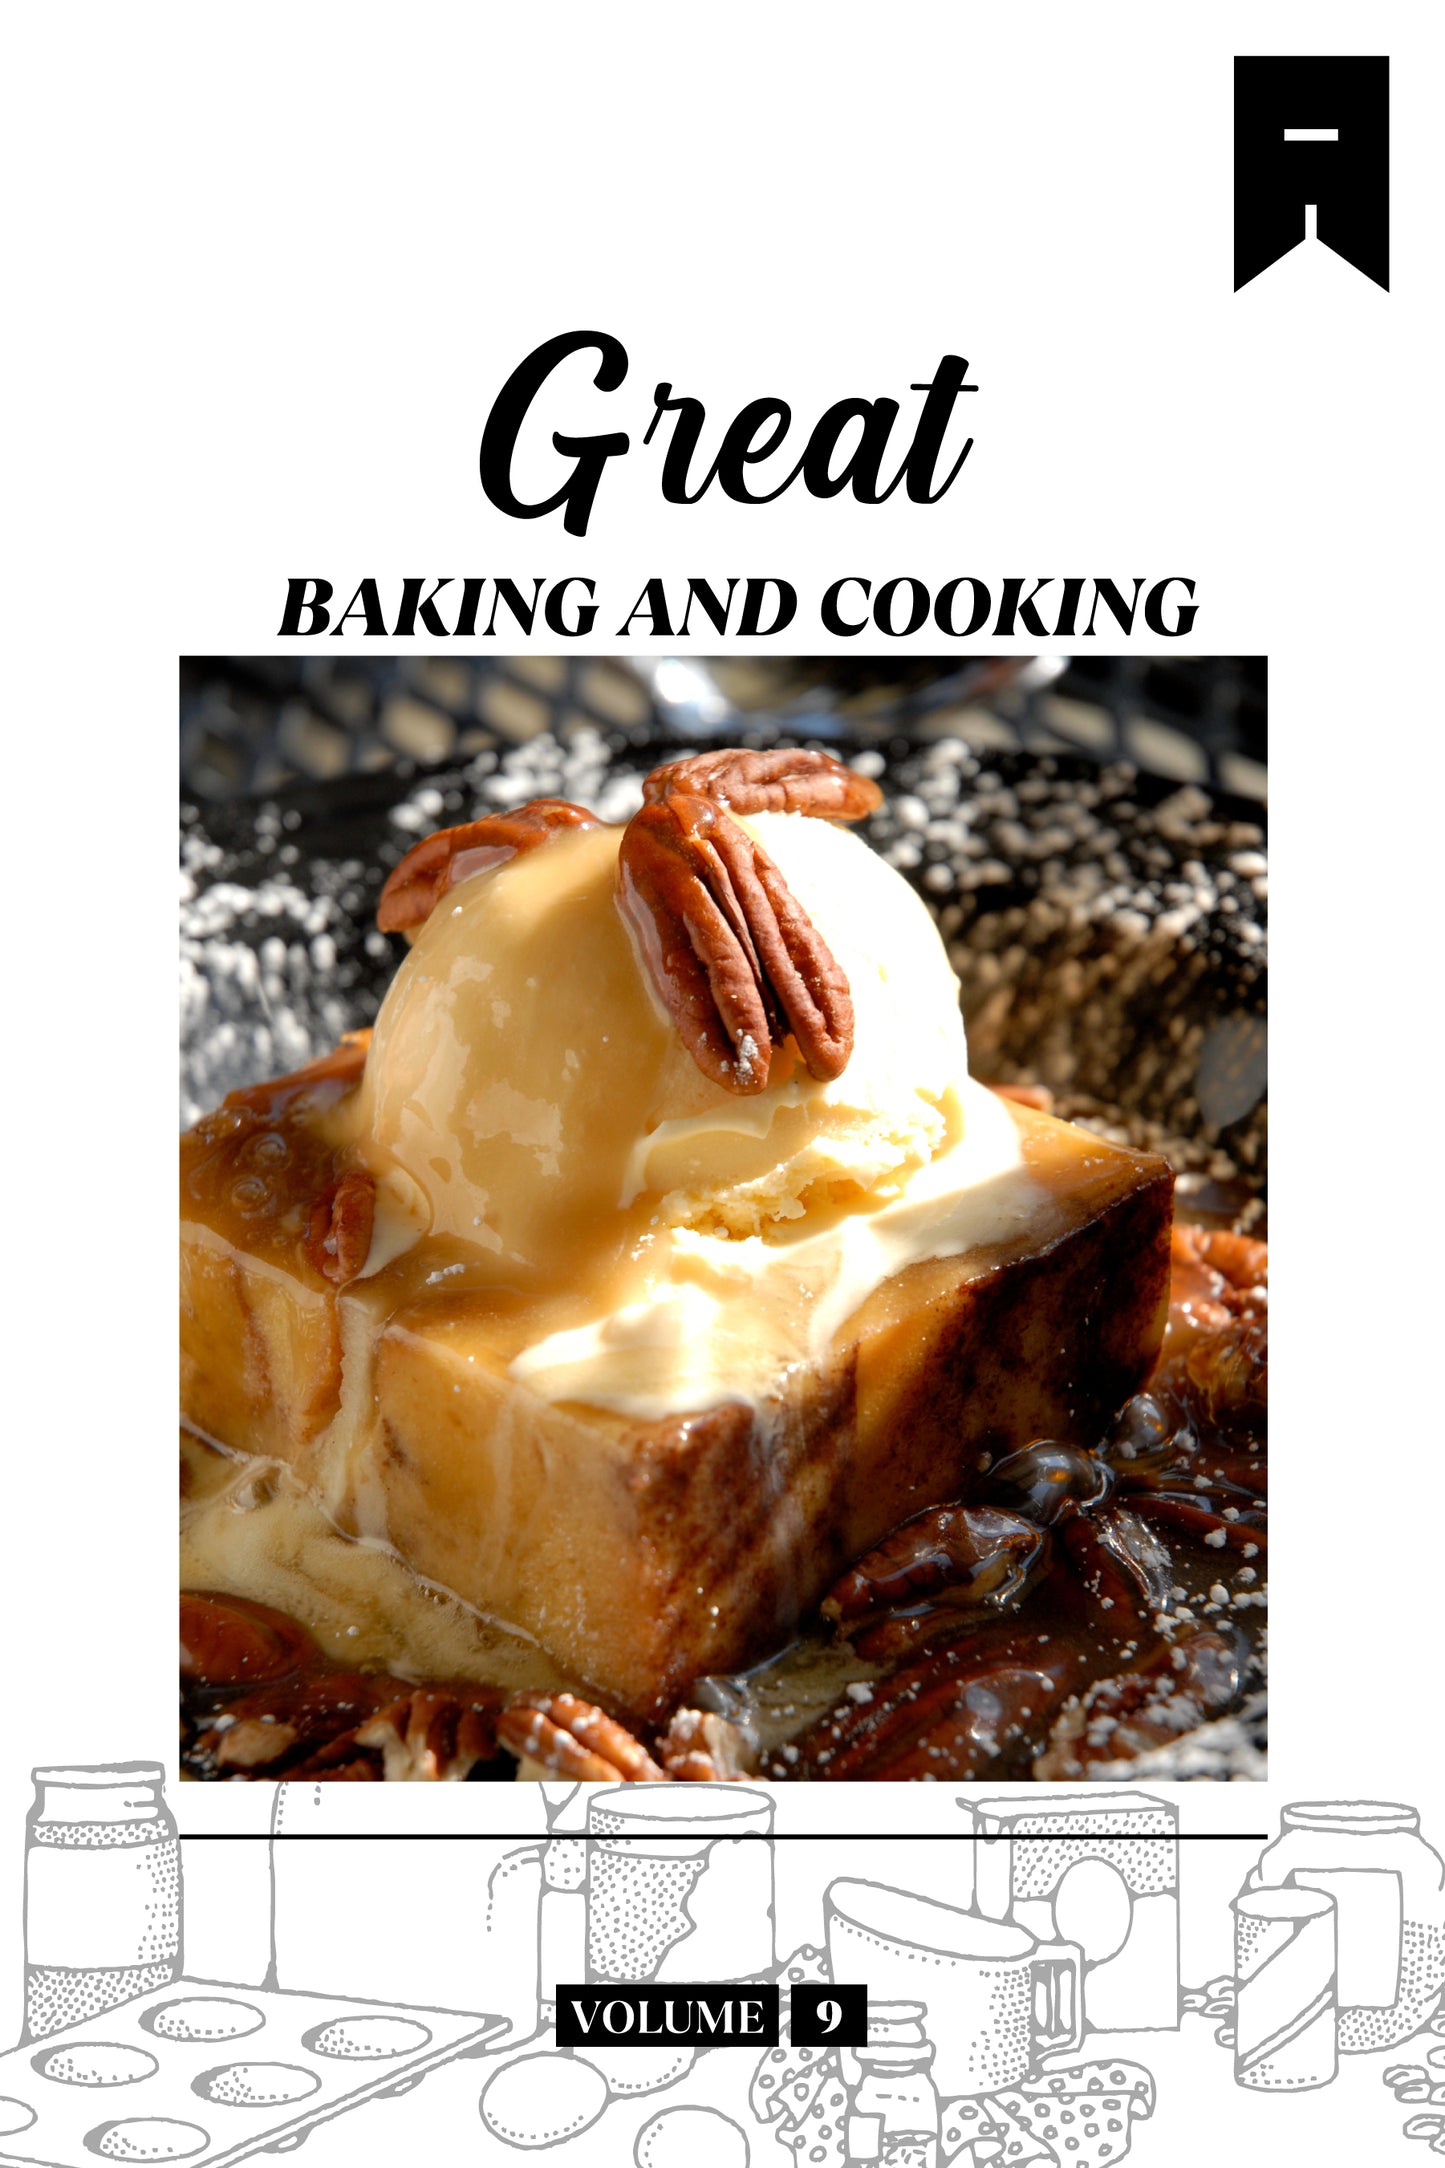 Great Baking (Volume 9) - Physical Book